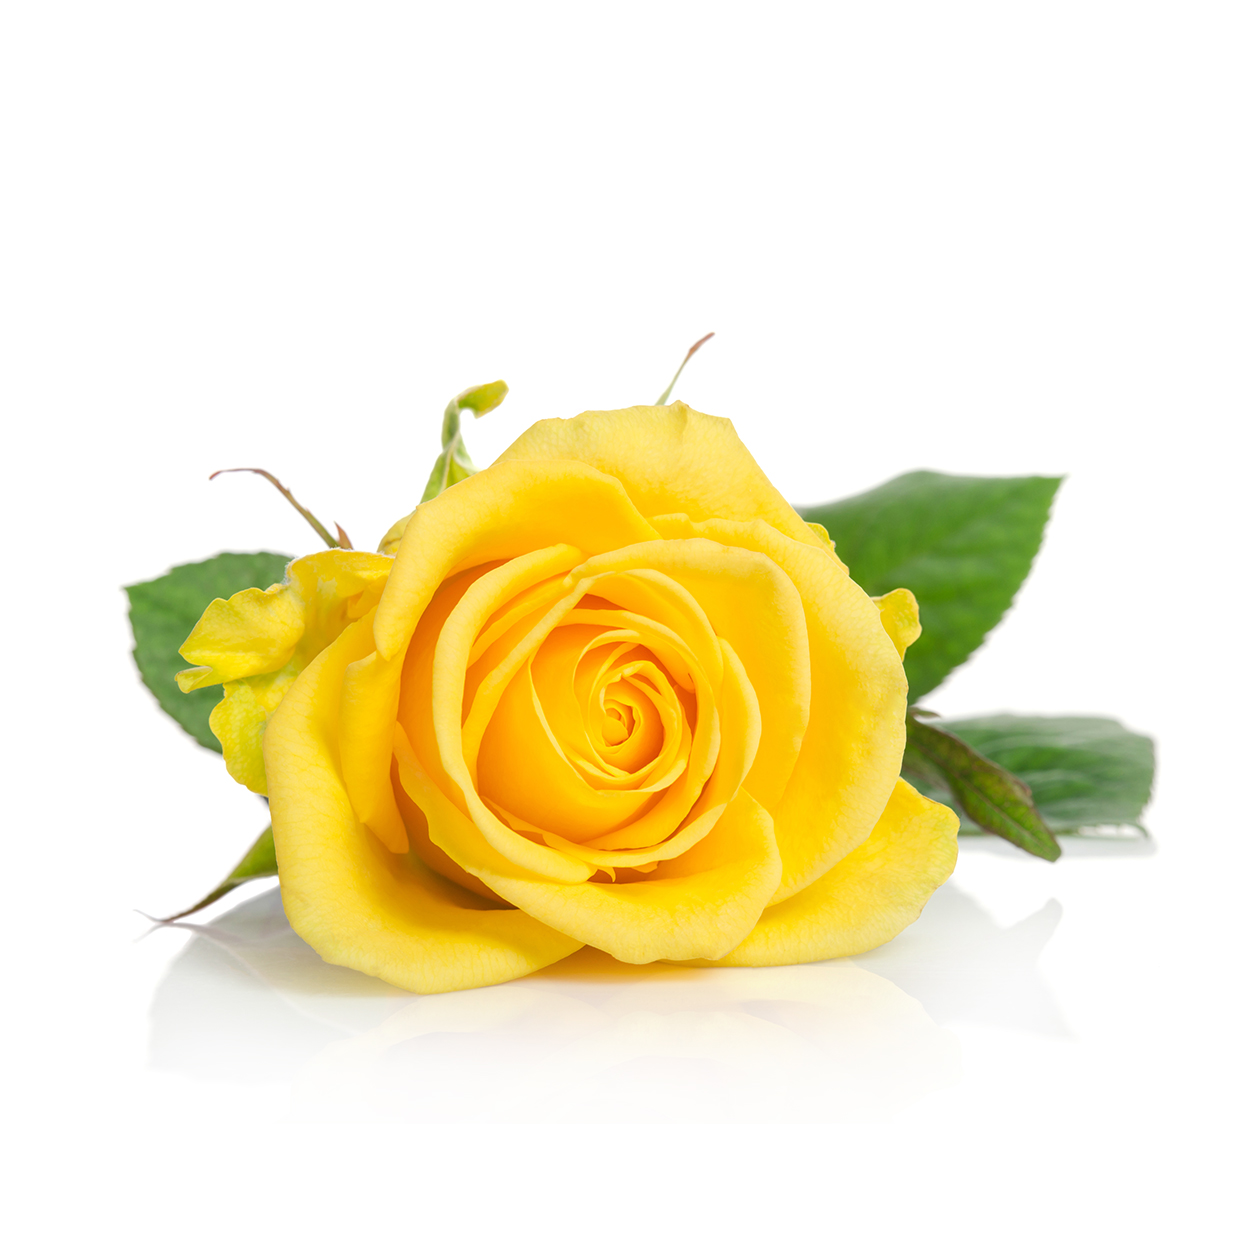 YELLOW ROSE - sent on April 22nd, 2021